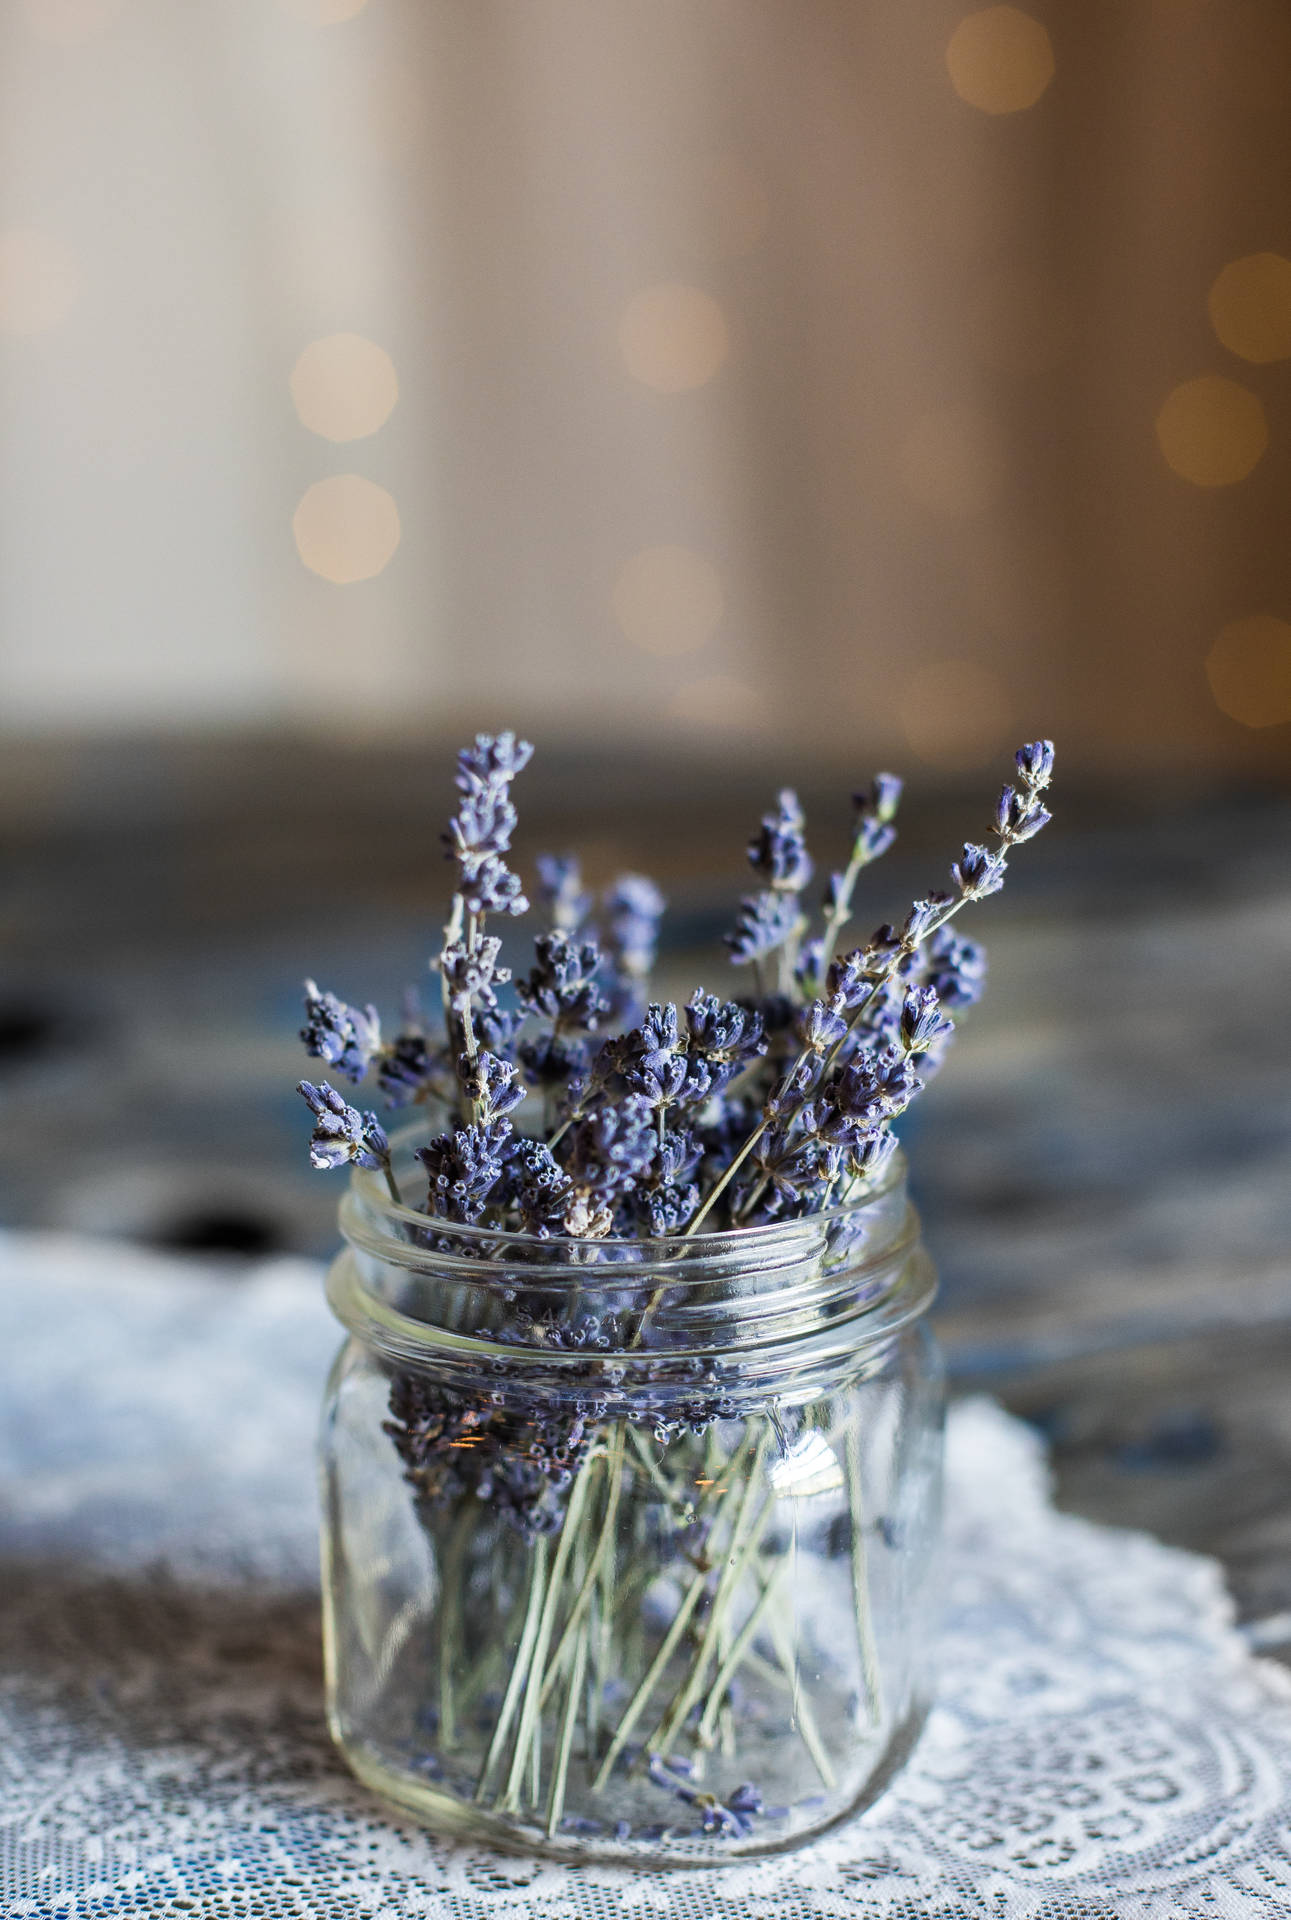 Lavender 4220X6274 Wallpaper and Background Image